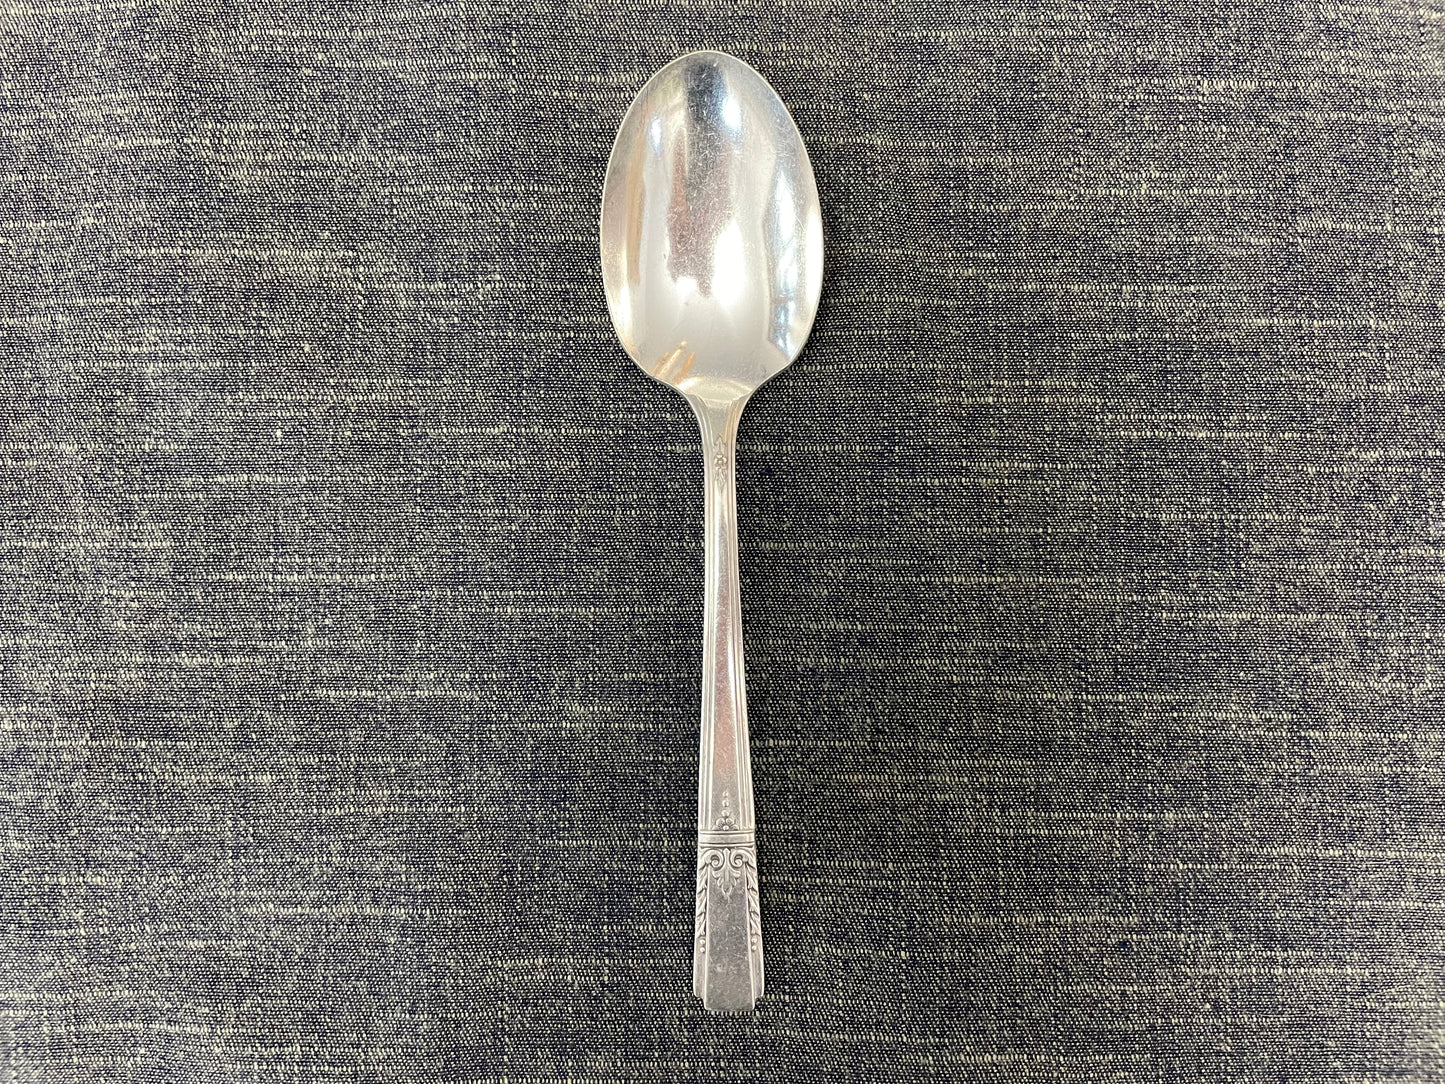 antique silver spoon for serving or prop photography